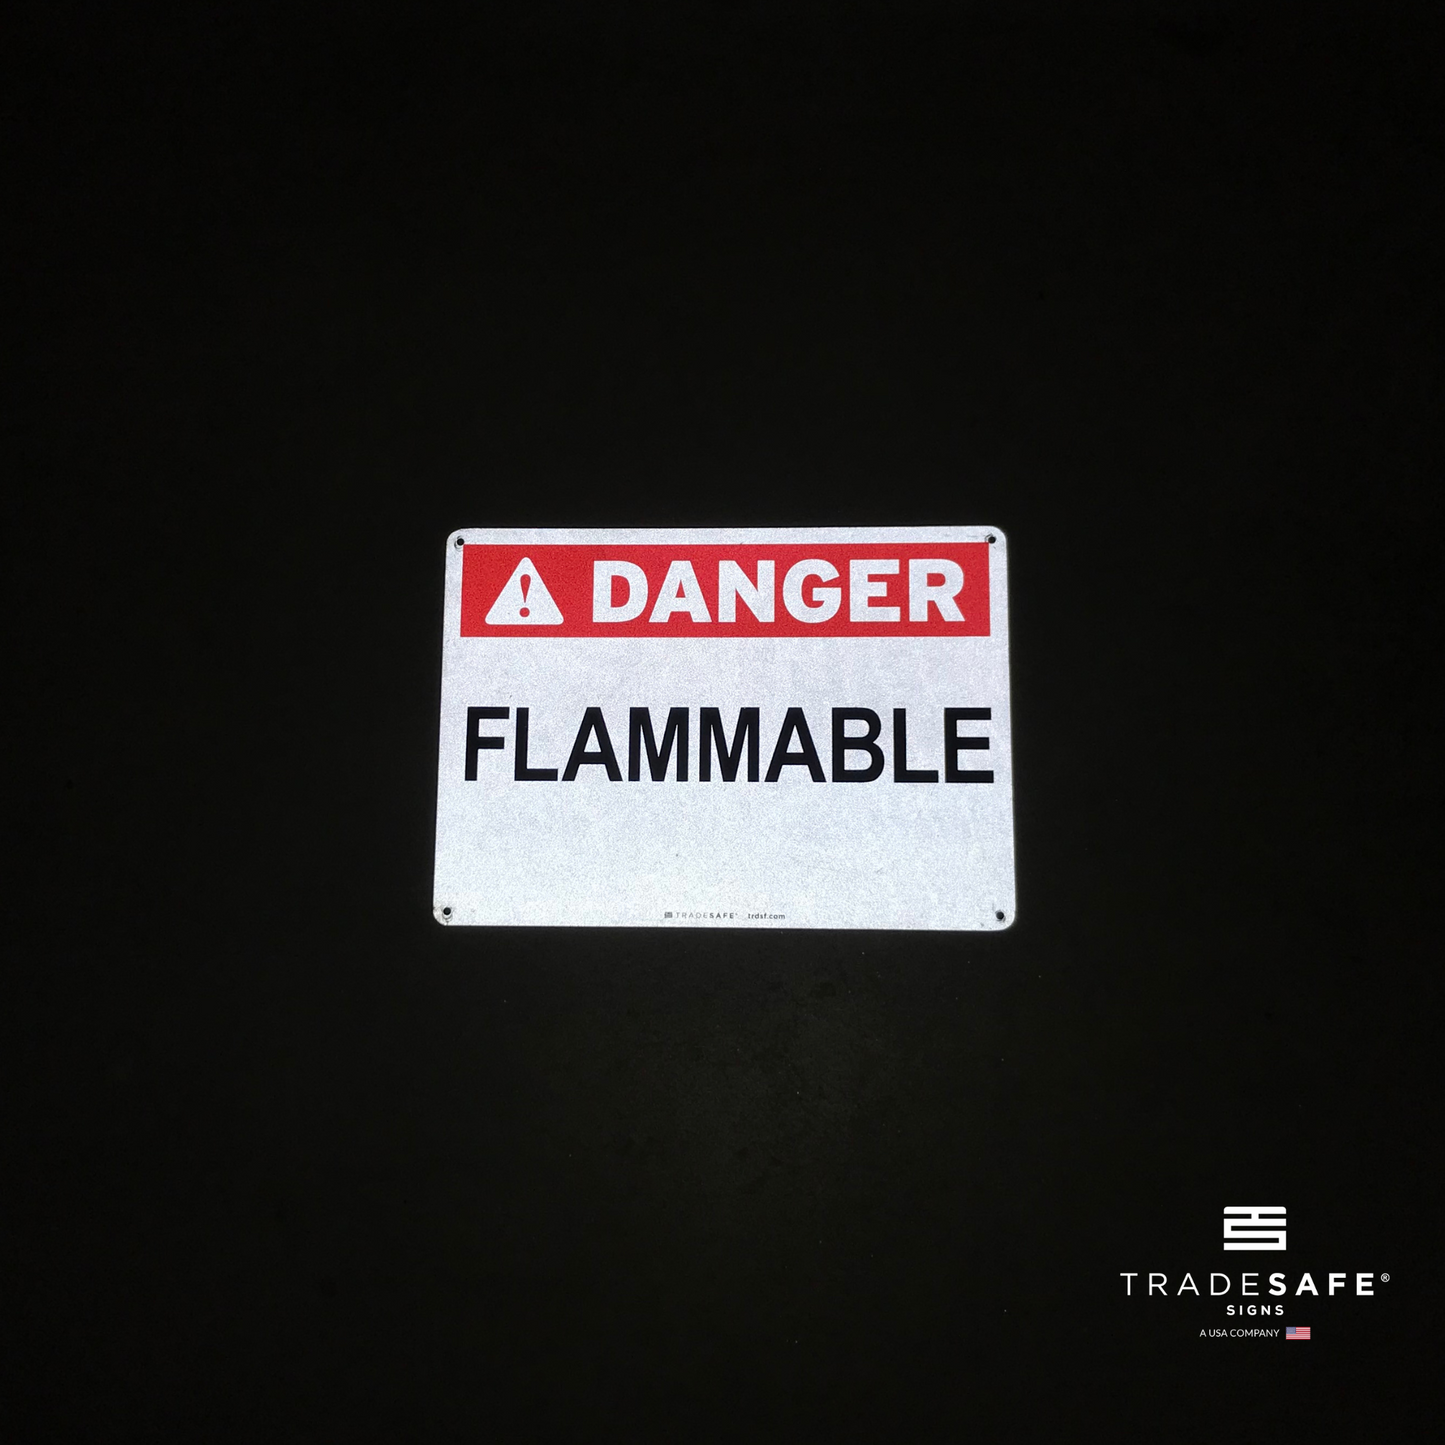 reflective attribute of flammable sign on black background